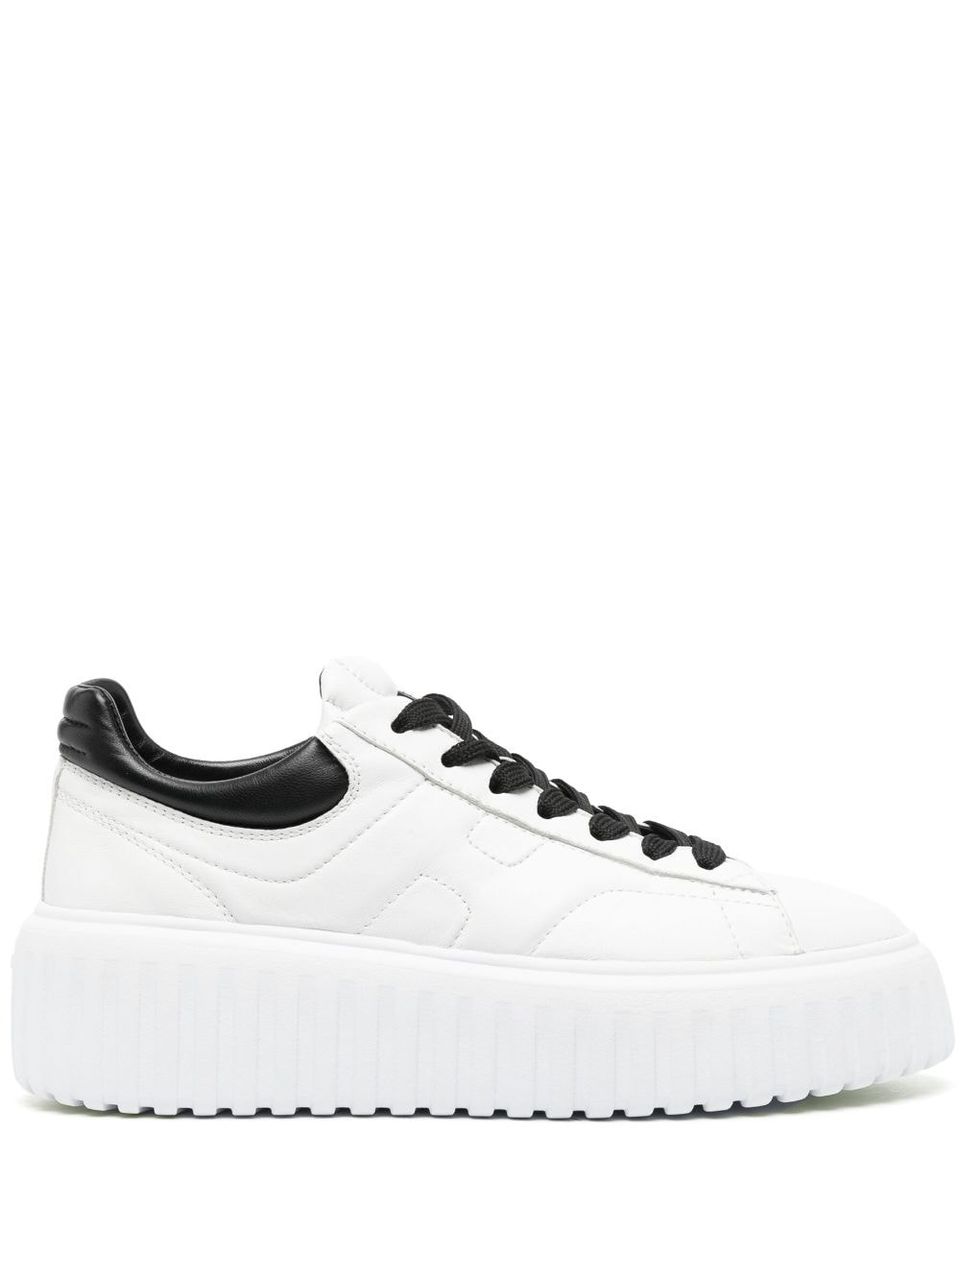 'Hogan H-Stripes' in leather sneakers